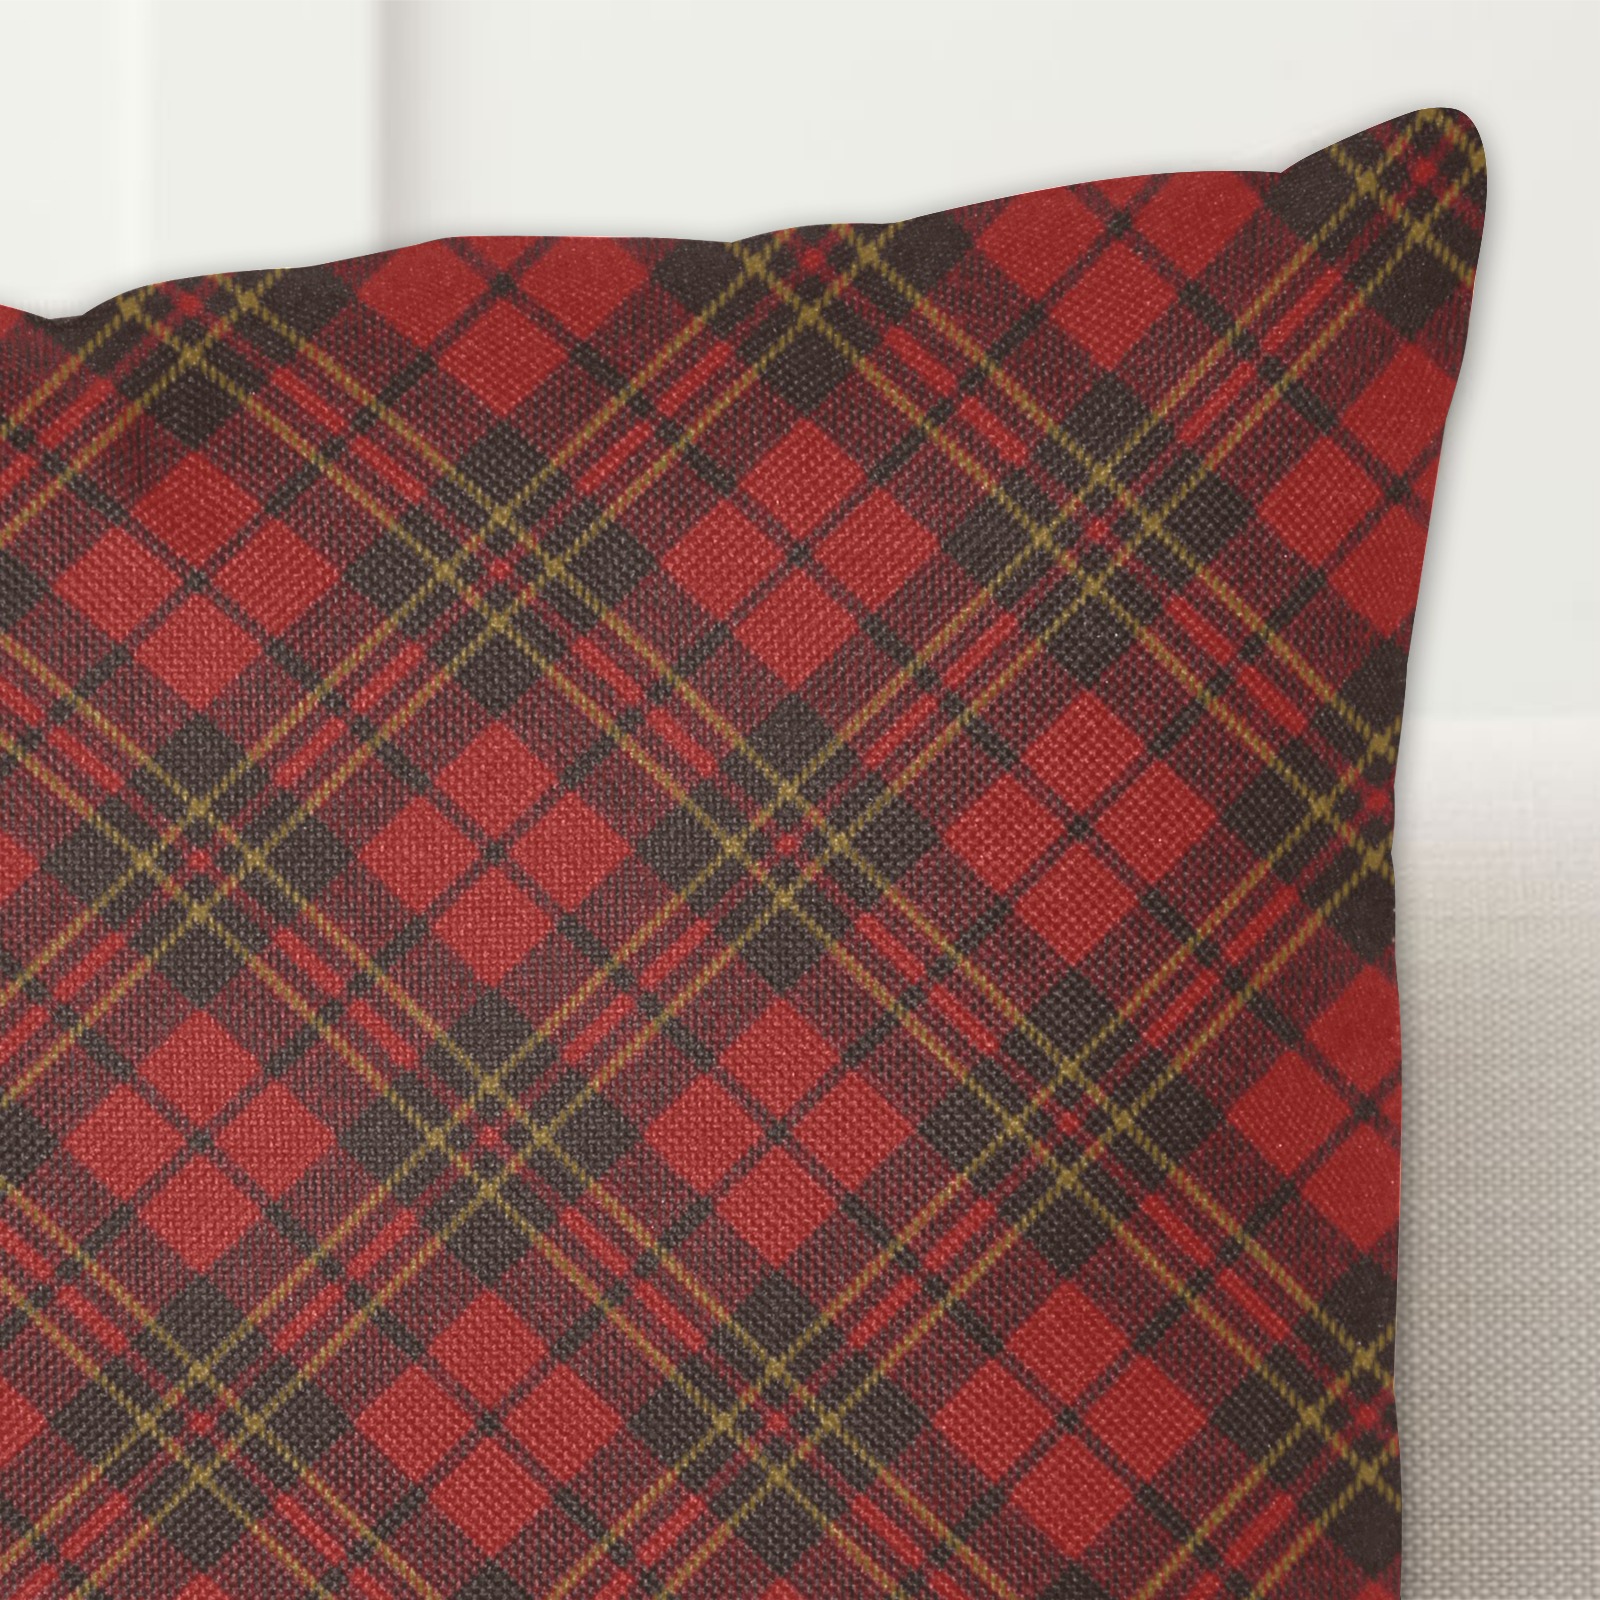 Red tartan plaid winter Christmas pattern holidays Linen Zippered Pillowcase 18"x18"(One Side&Pack of 2)